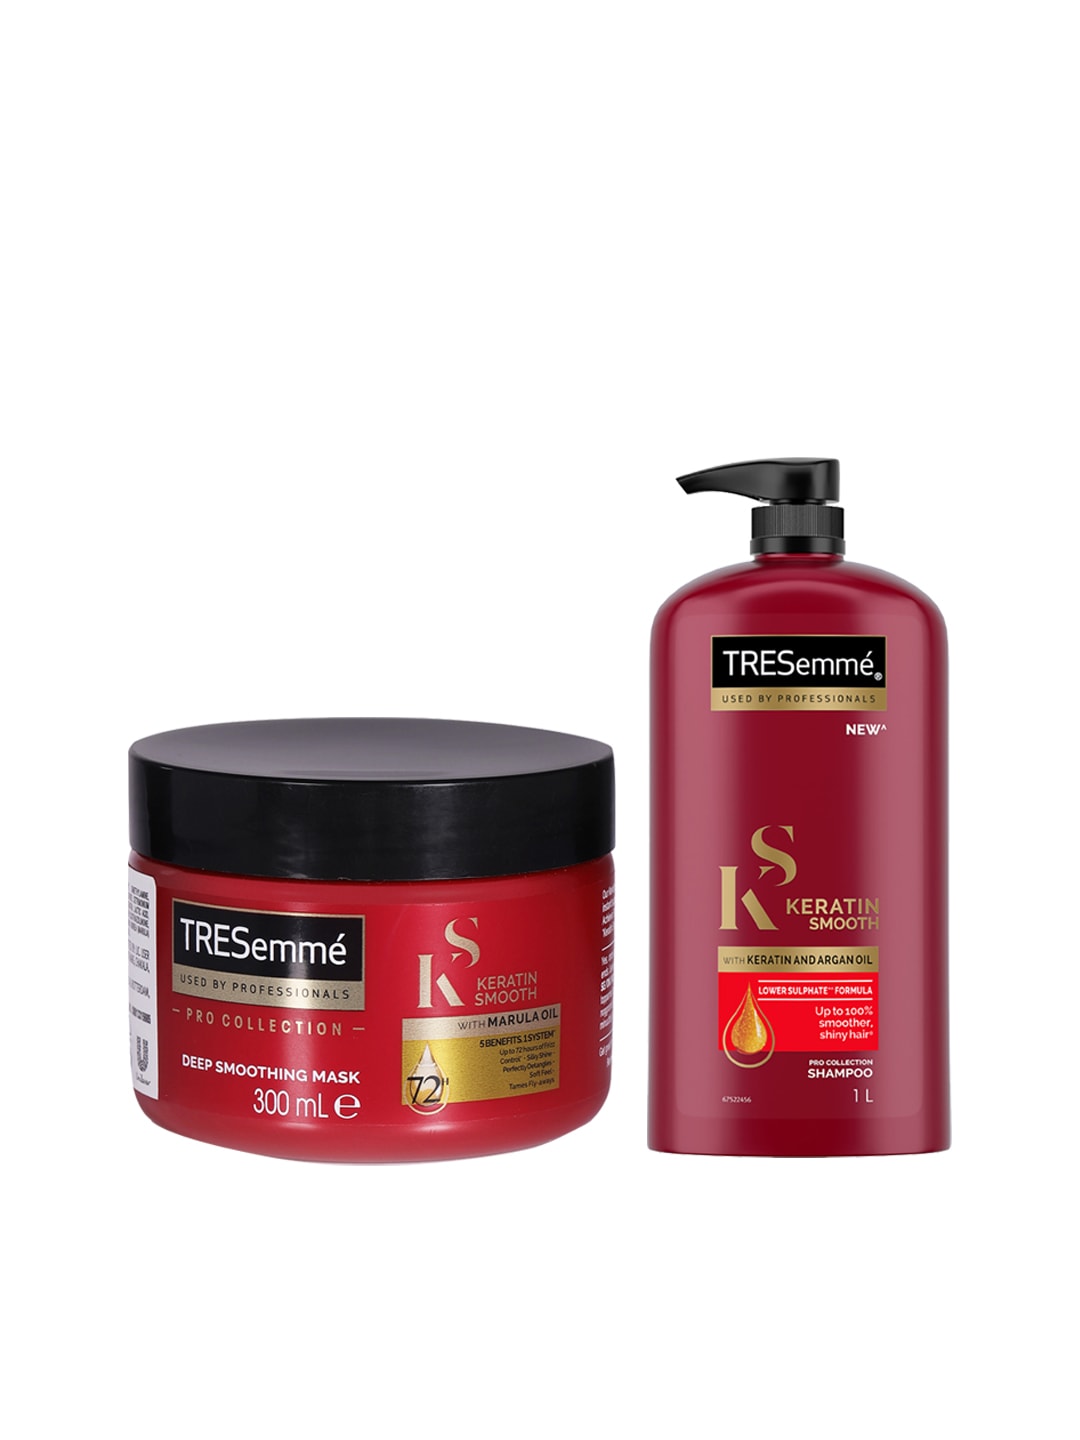 TRESemme Set of Keratin Smooth Pro Collection Deep Smoothening Hair Mask & Shampoo Price in India